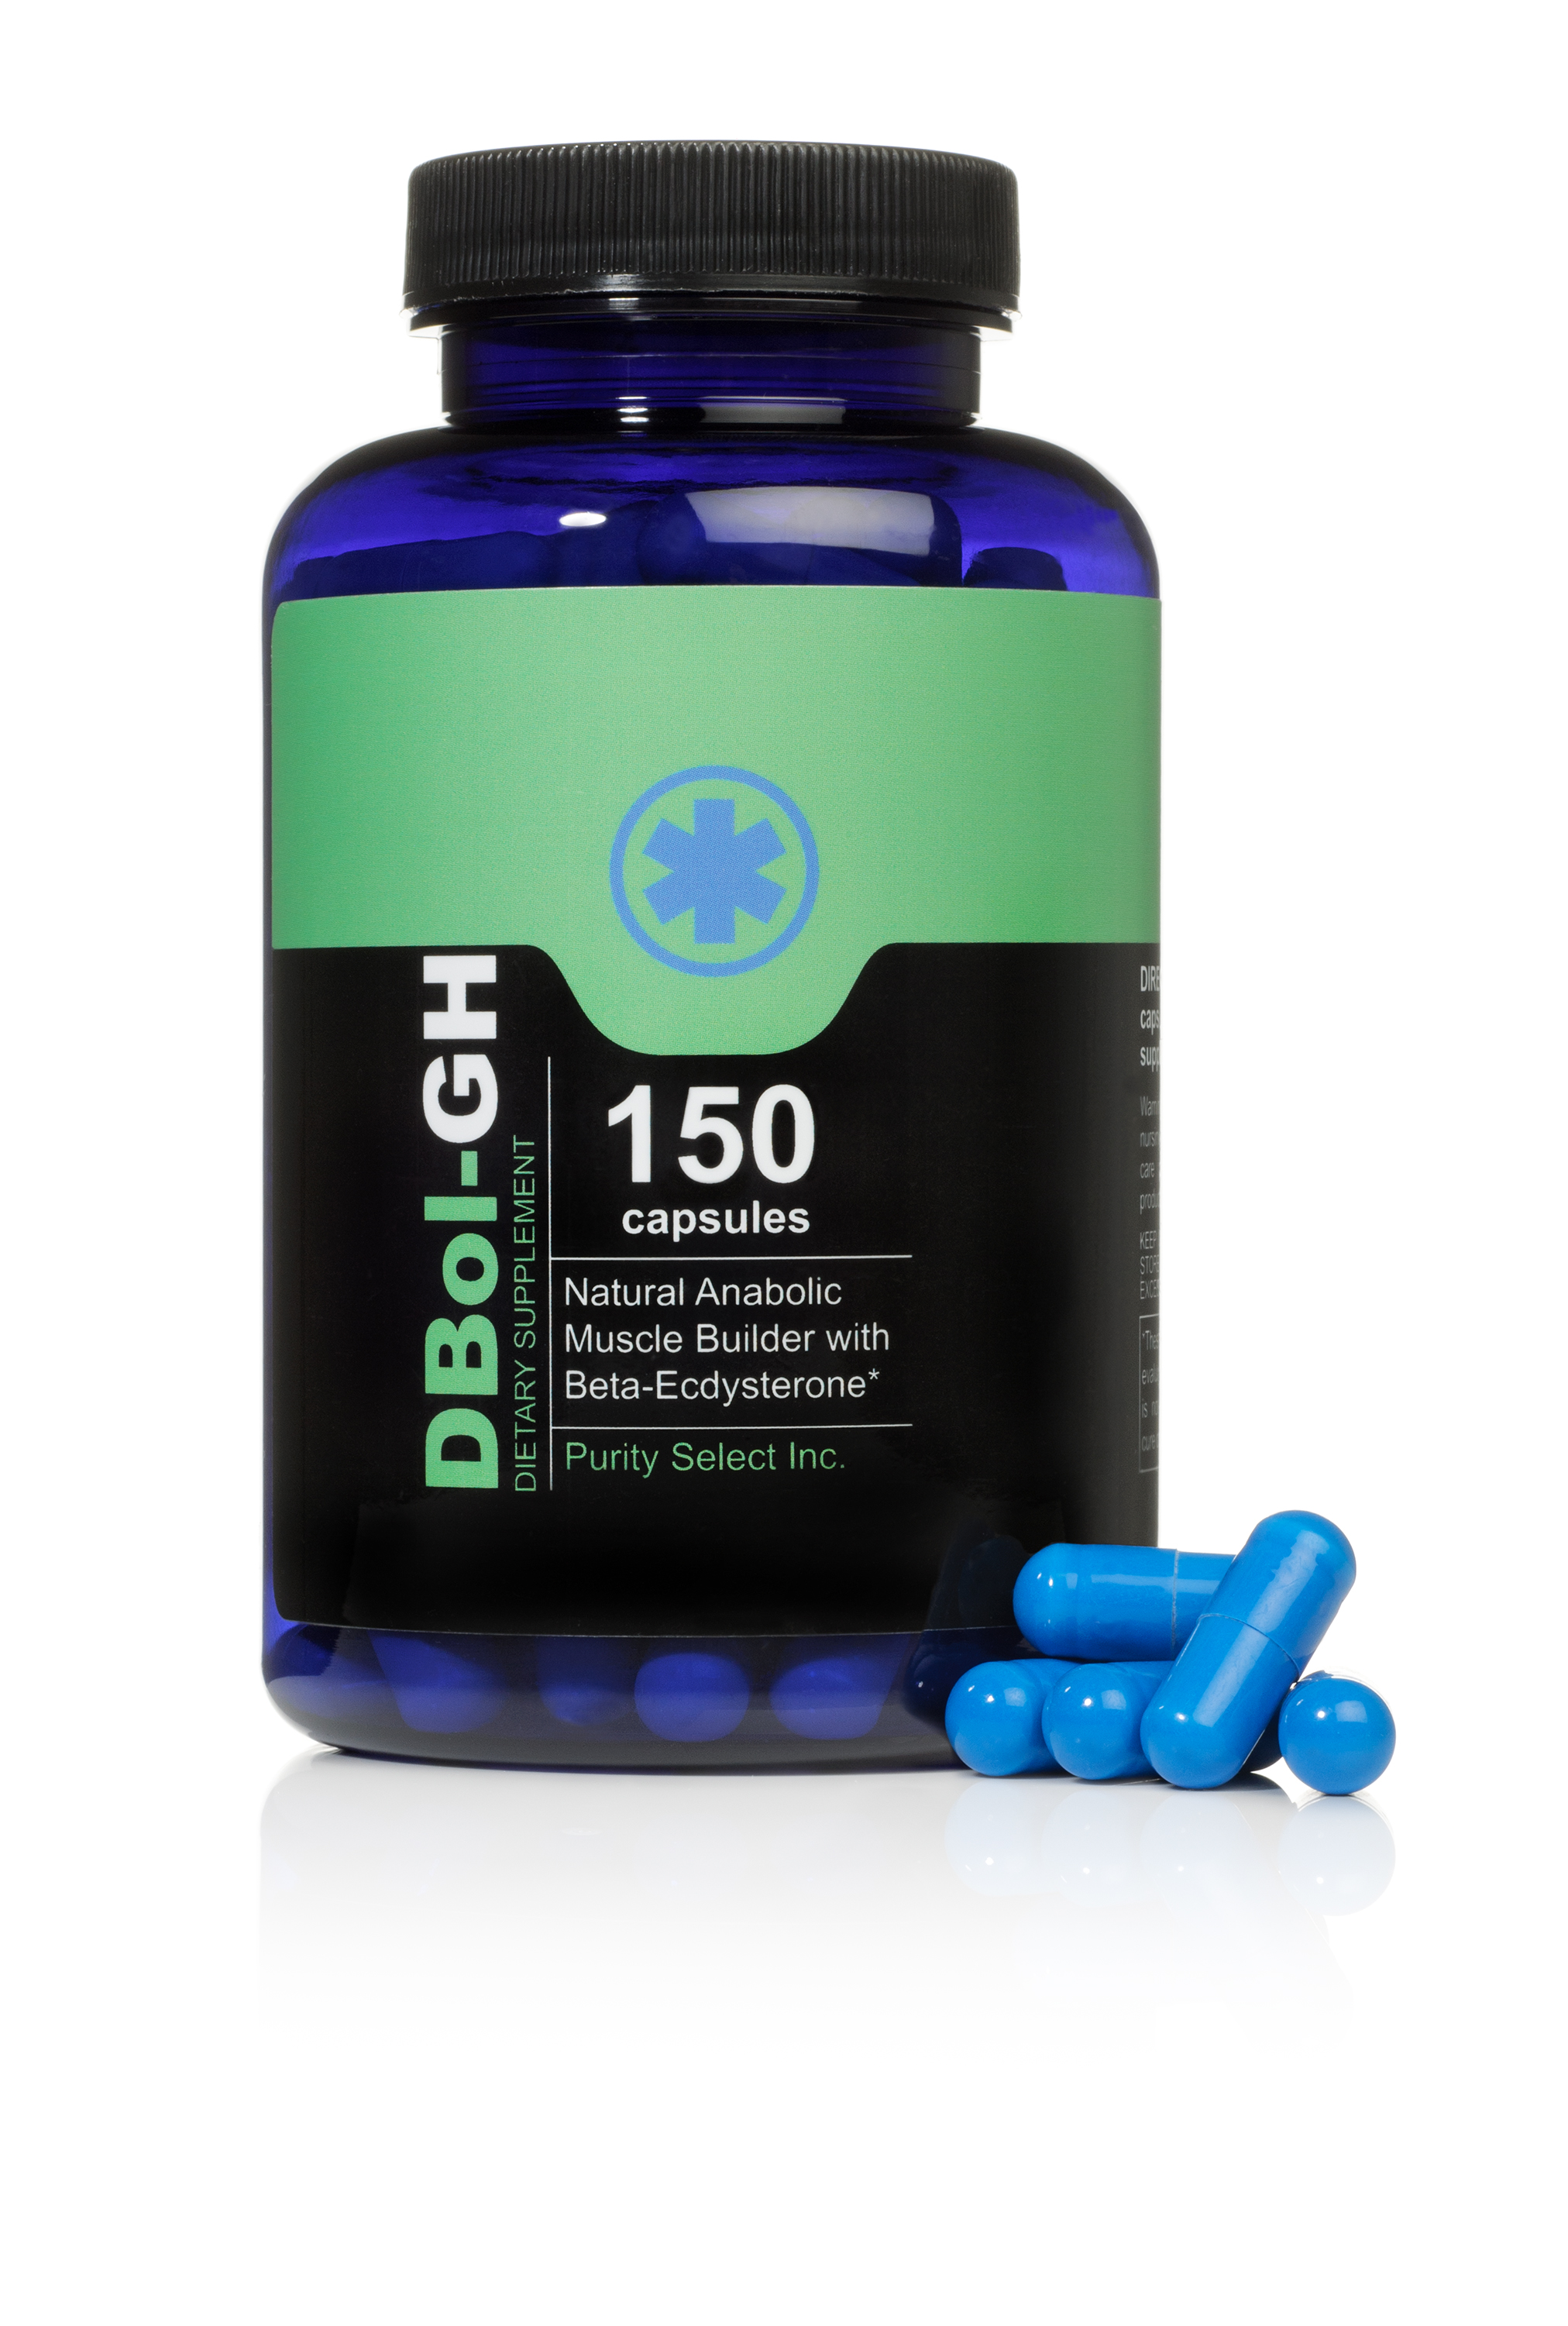 DBOL-GH Muscle Growth Supplement by HGH.com